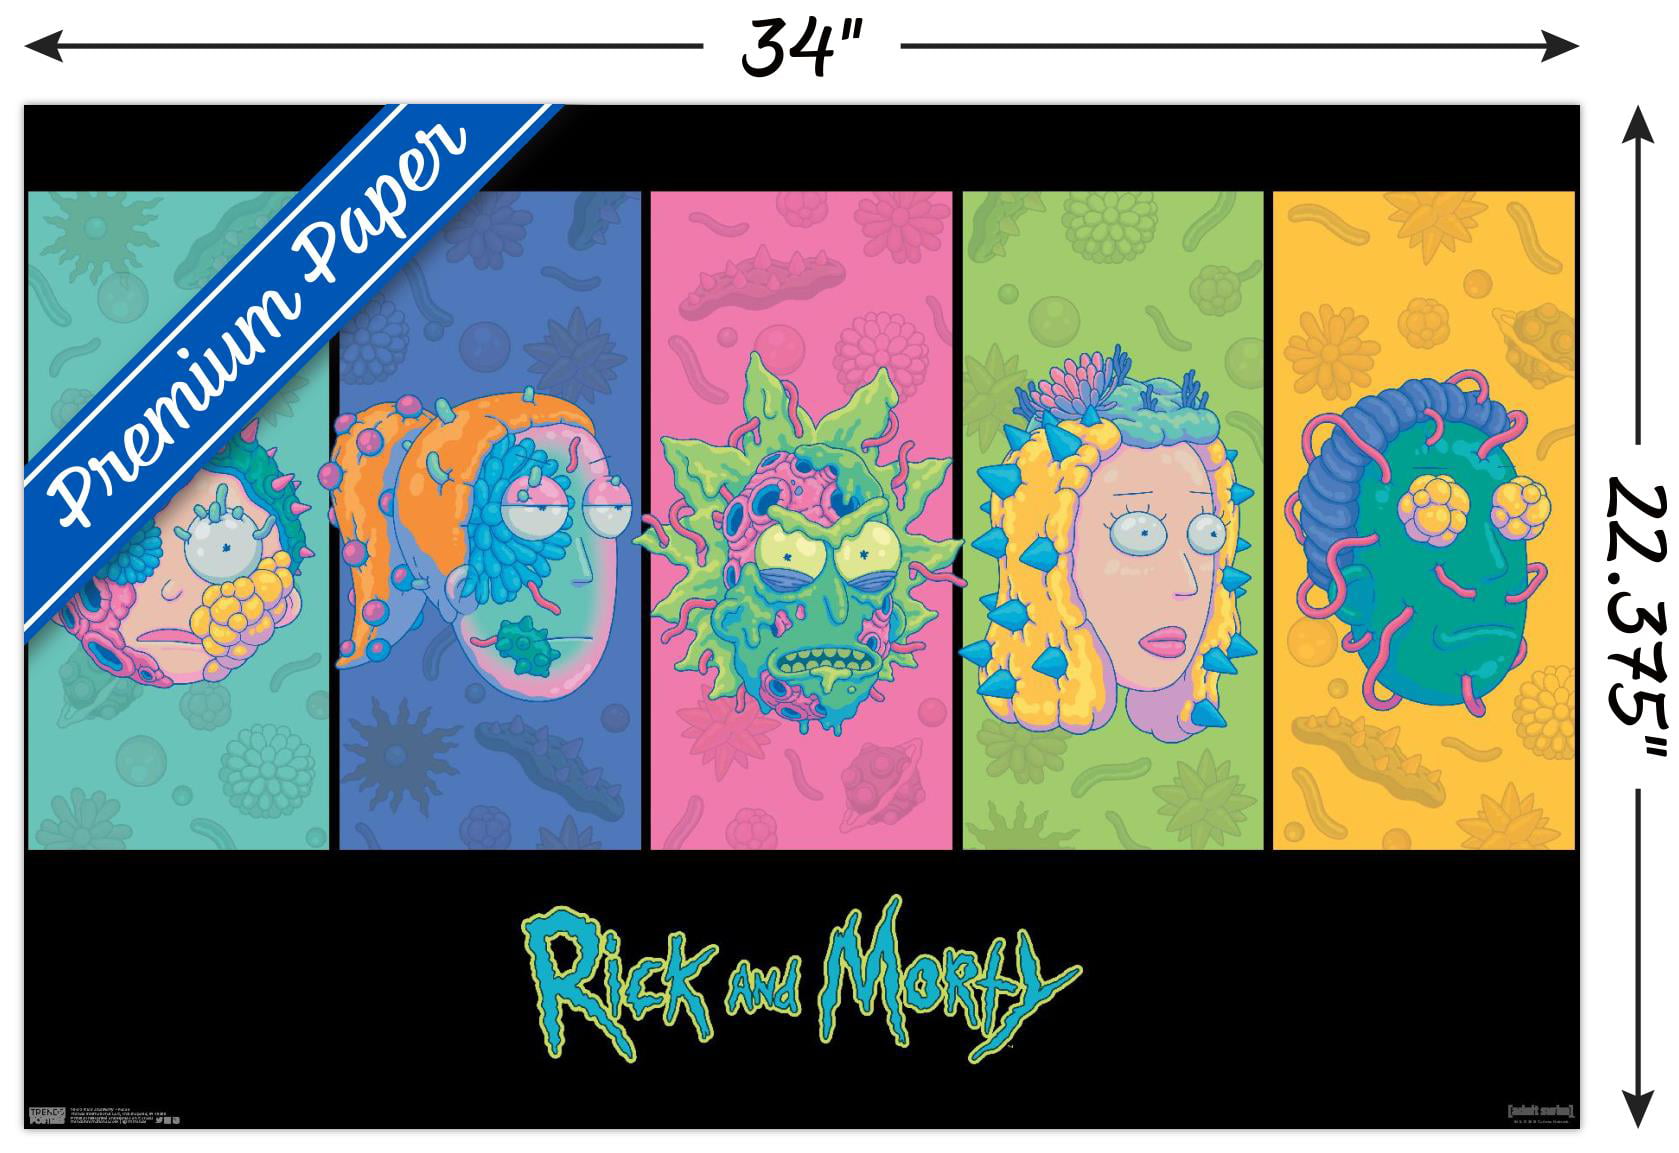 Spiritual Leader Rick Poster Psychedelic Rick and Morty Tapestry Wall Art